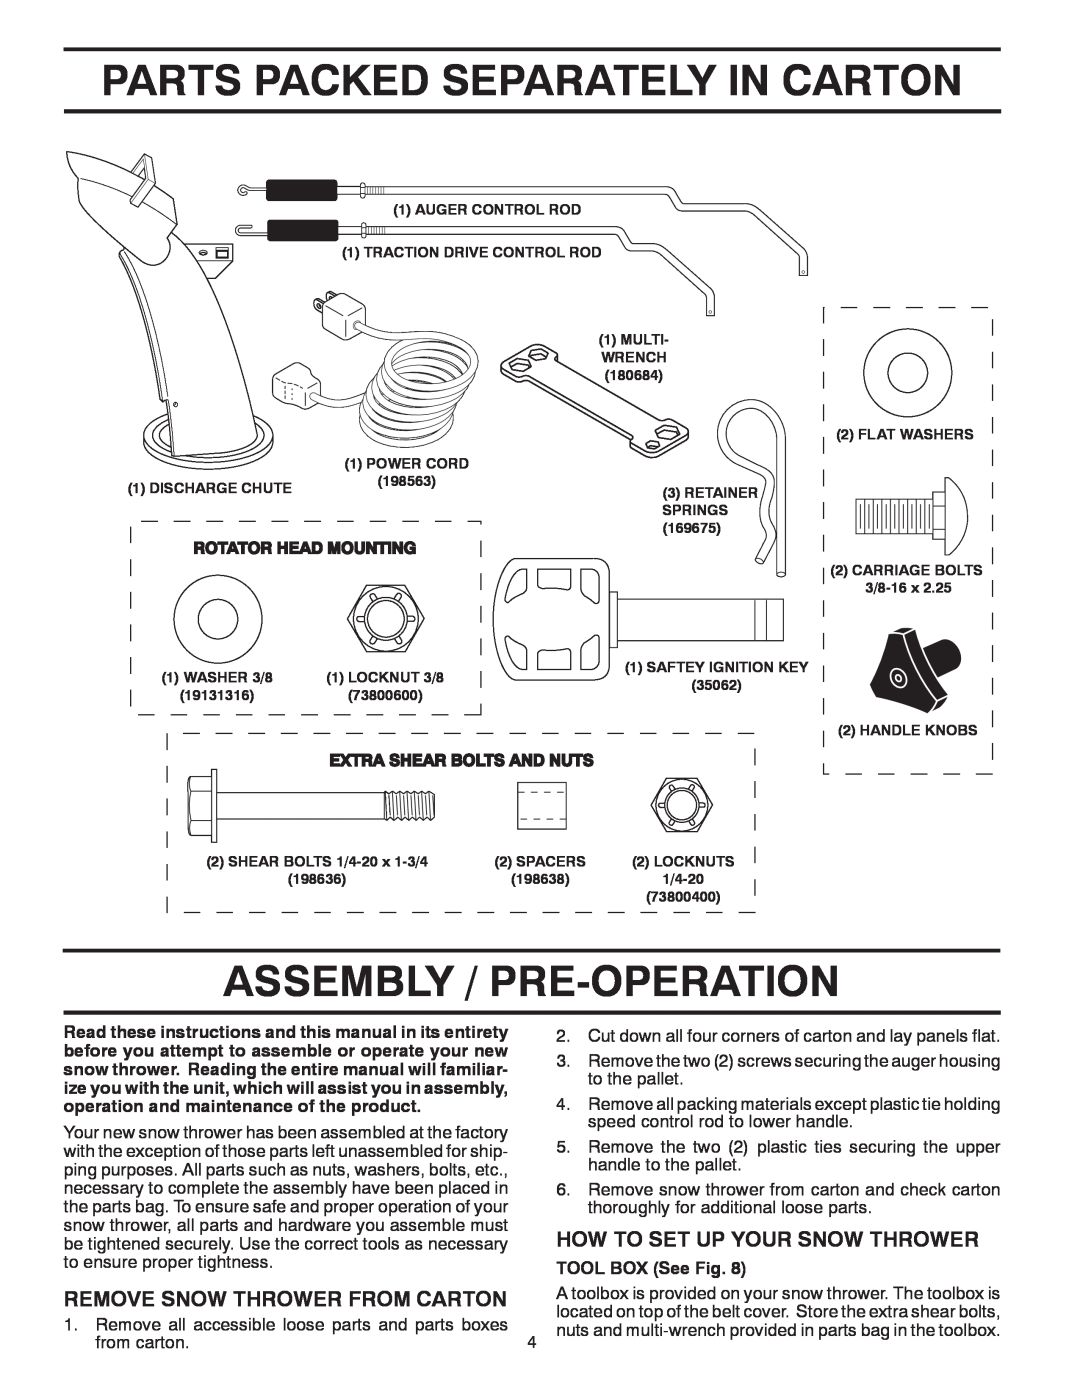 Poulan 96198002501, 424714 Parts Packed Separately In Carton, Assembly / Pre-Operation, How To Set Up Your Snow Thrower 